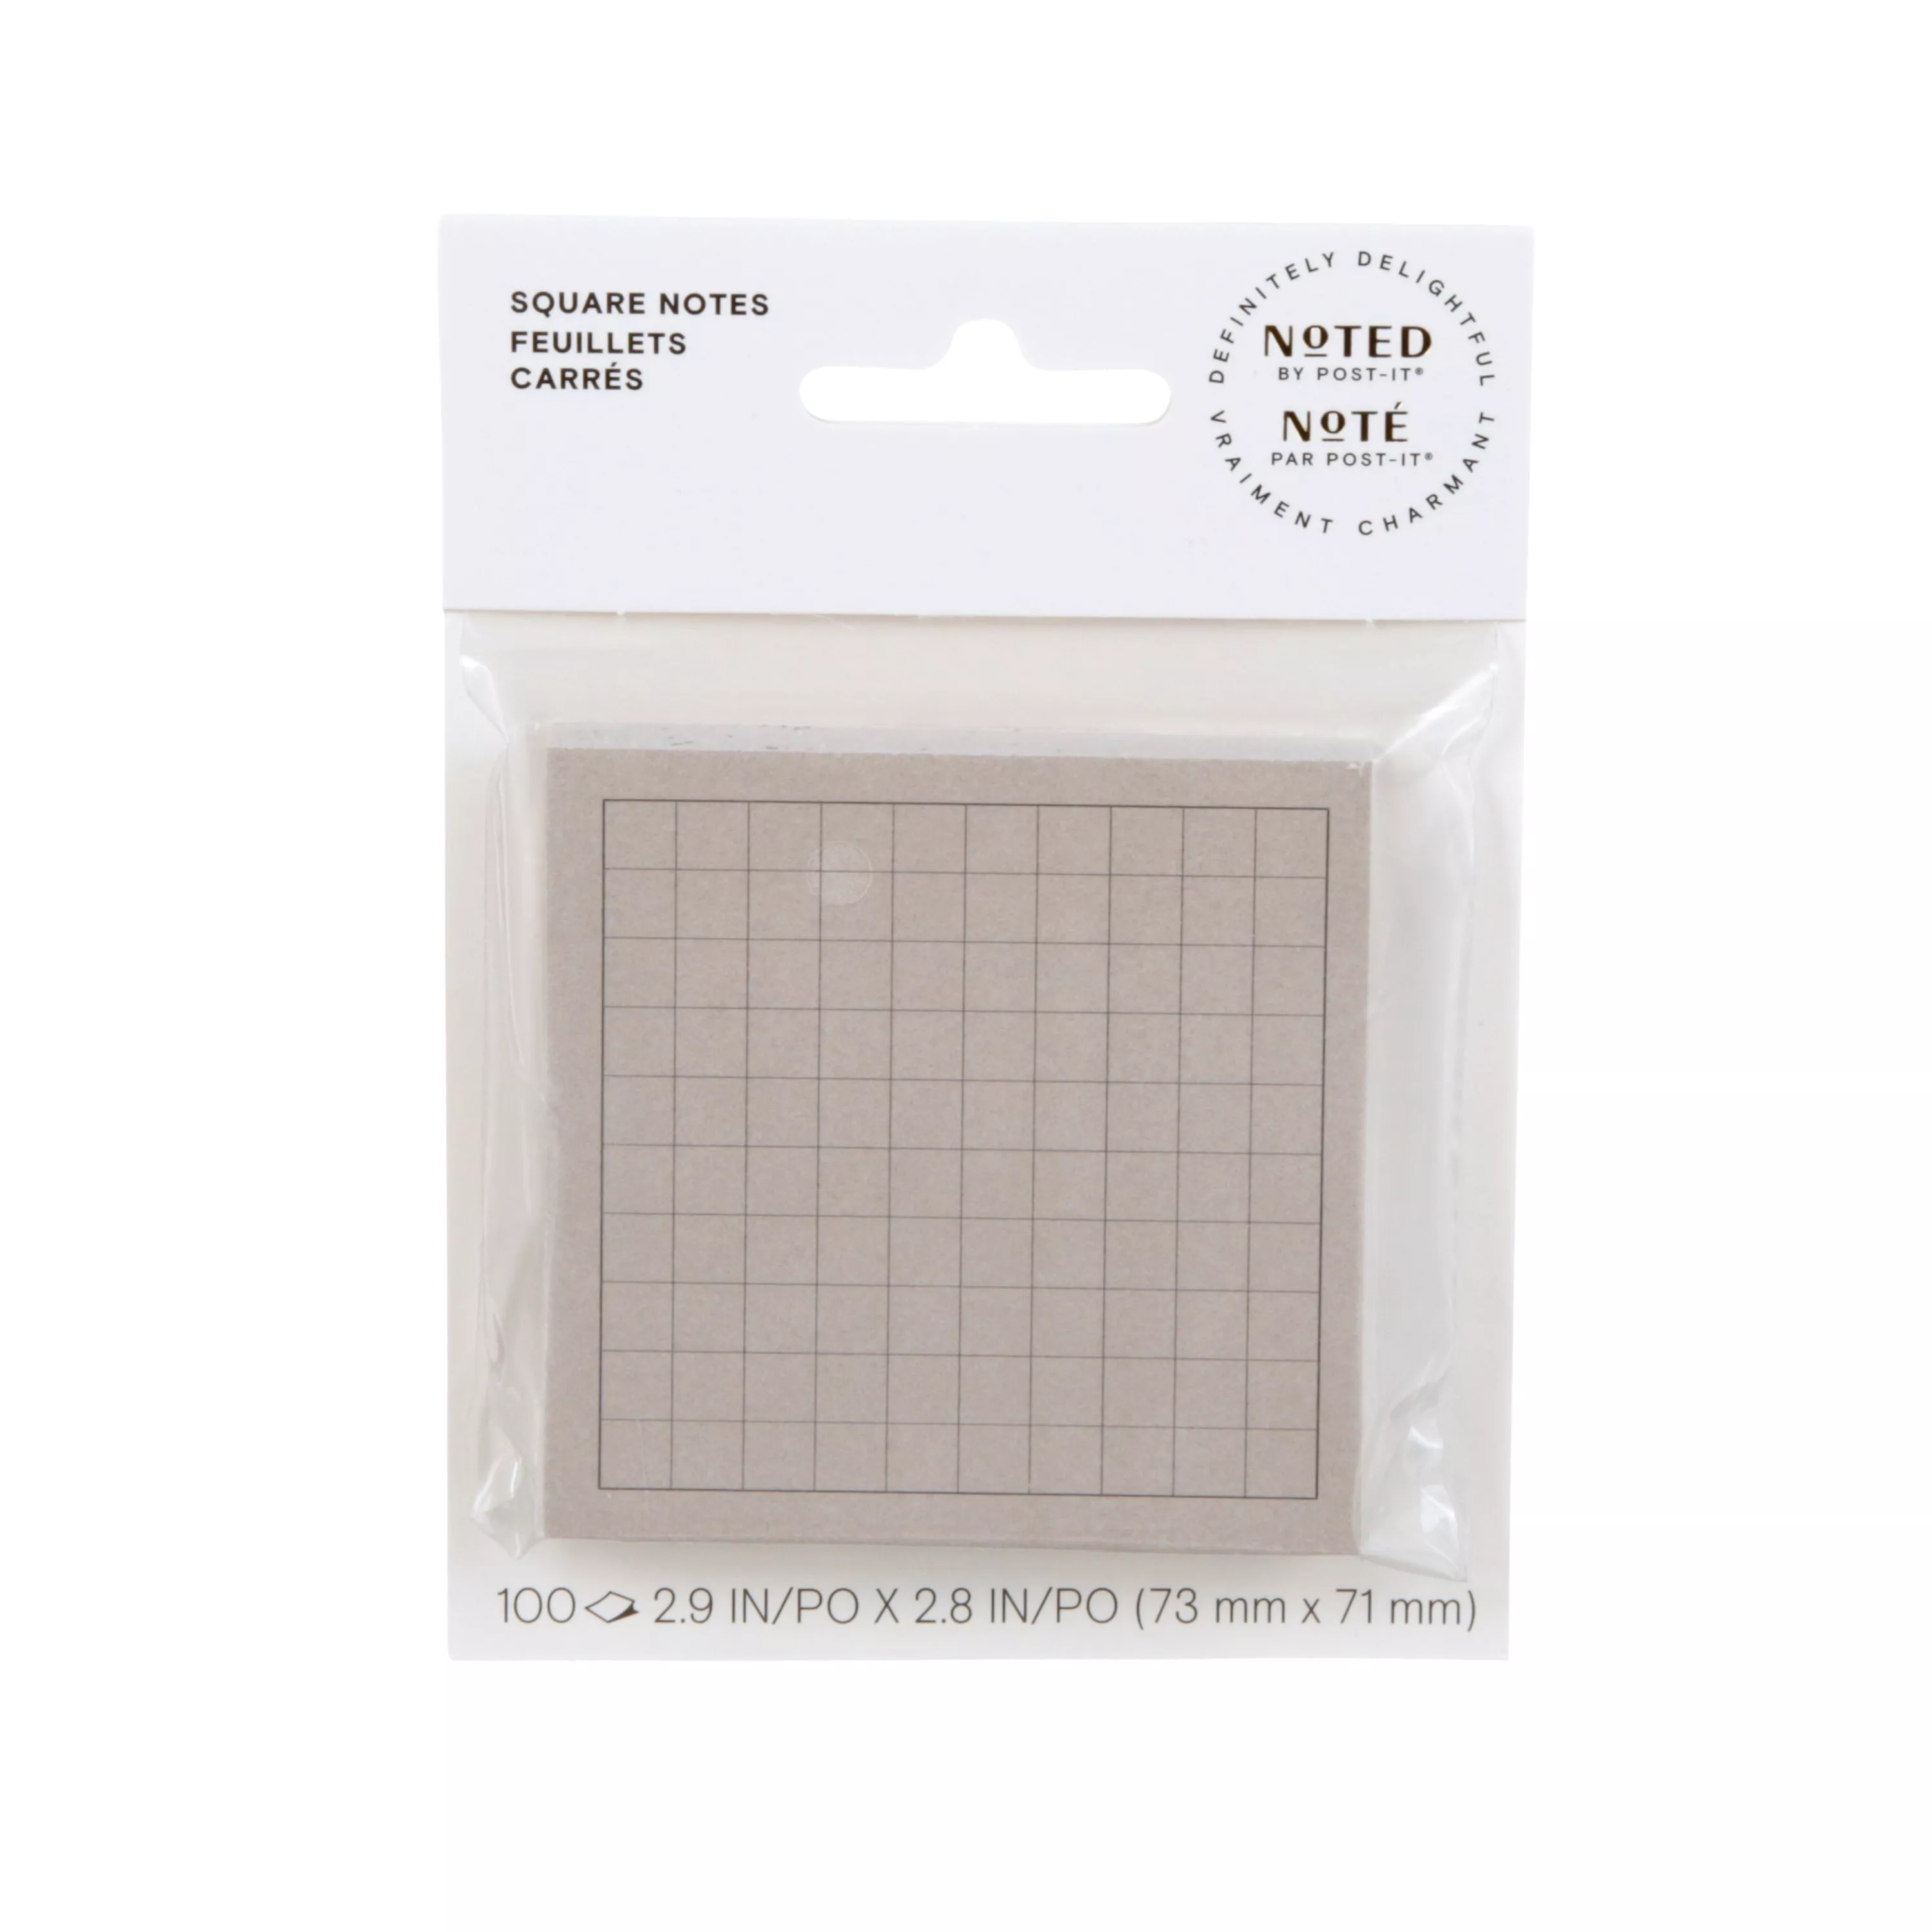 Post-it® Printed Notes NTD-33-GRY-EF, 2.9 in x 2.8 in (73 mm x 71 mm)